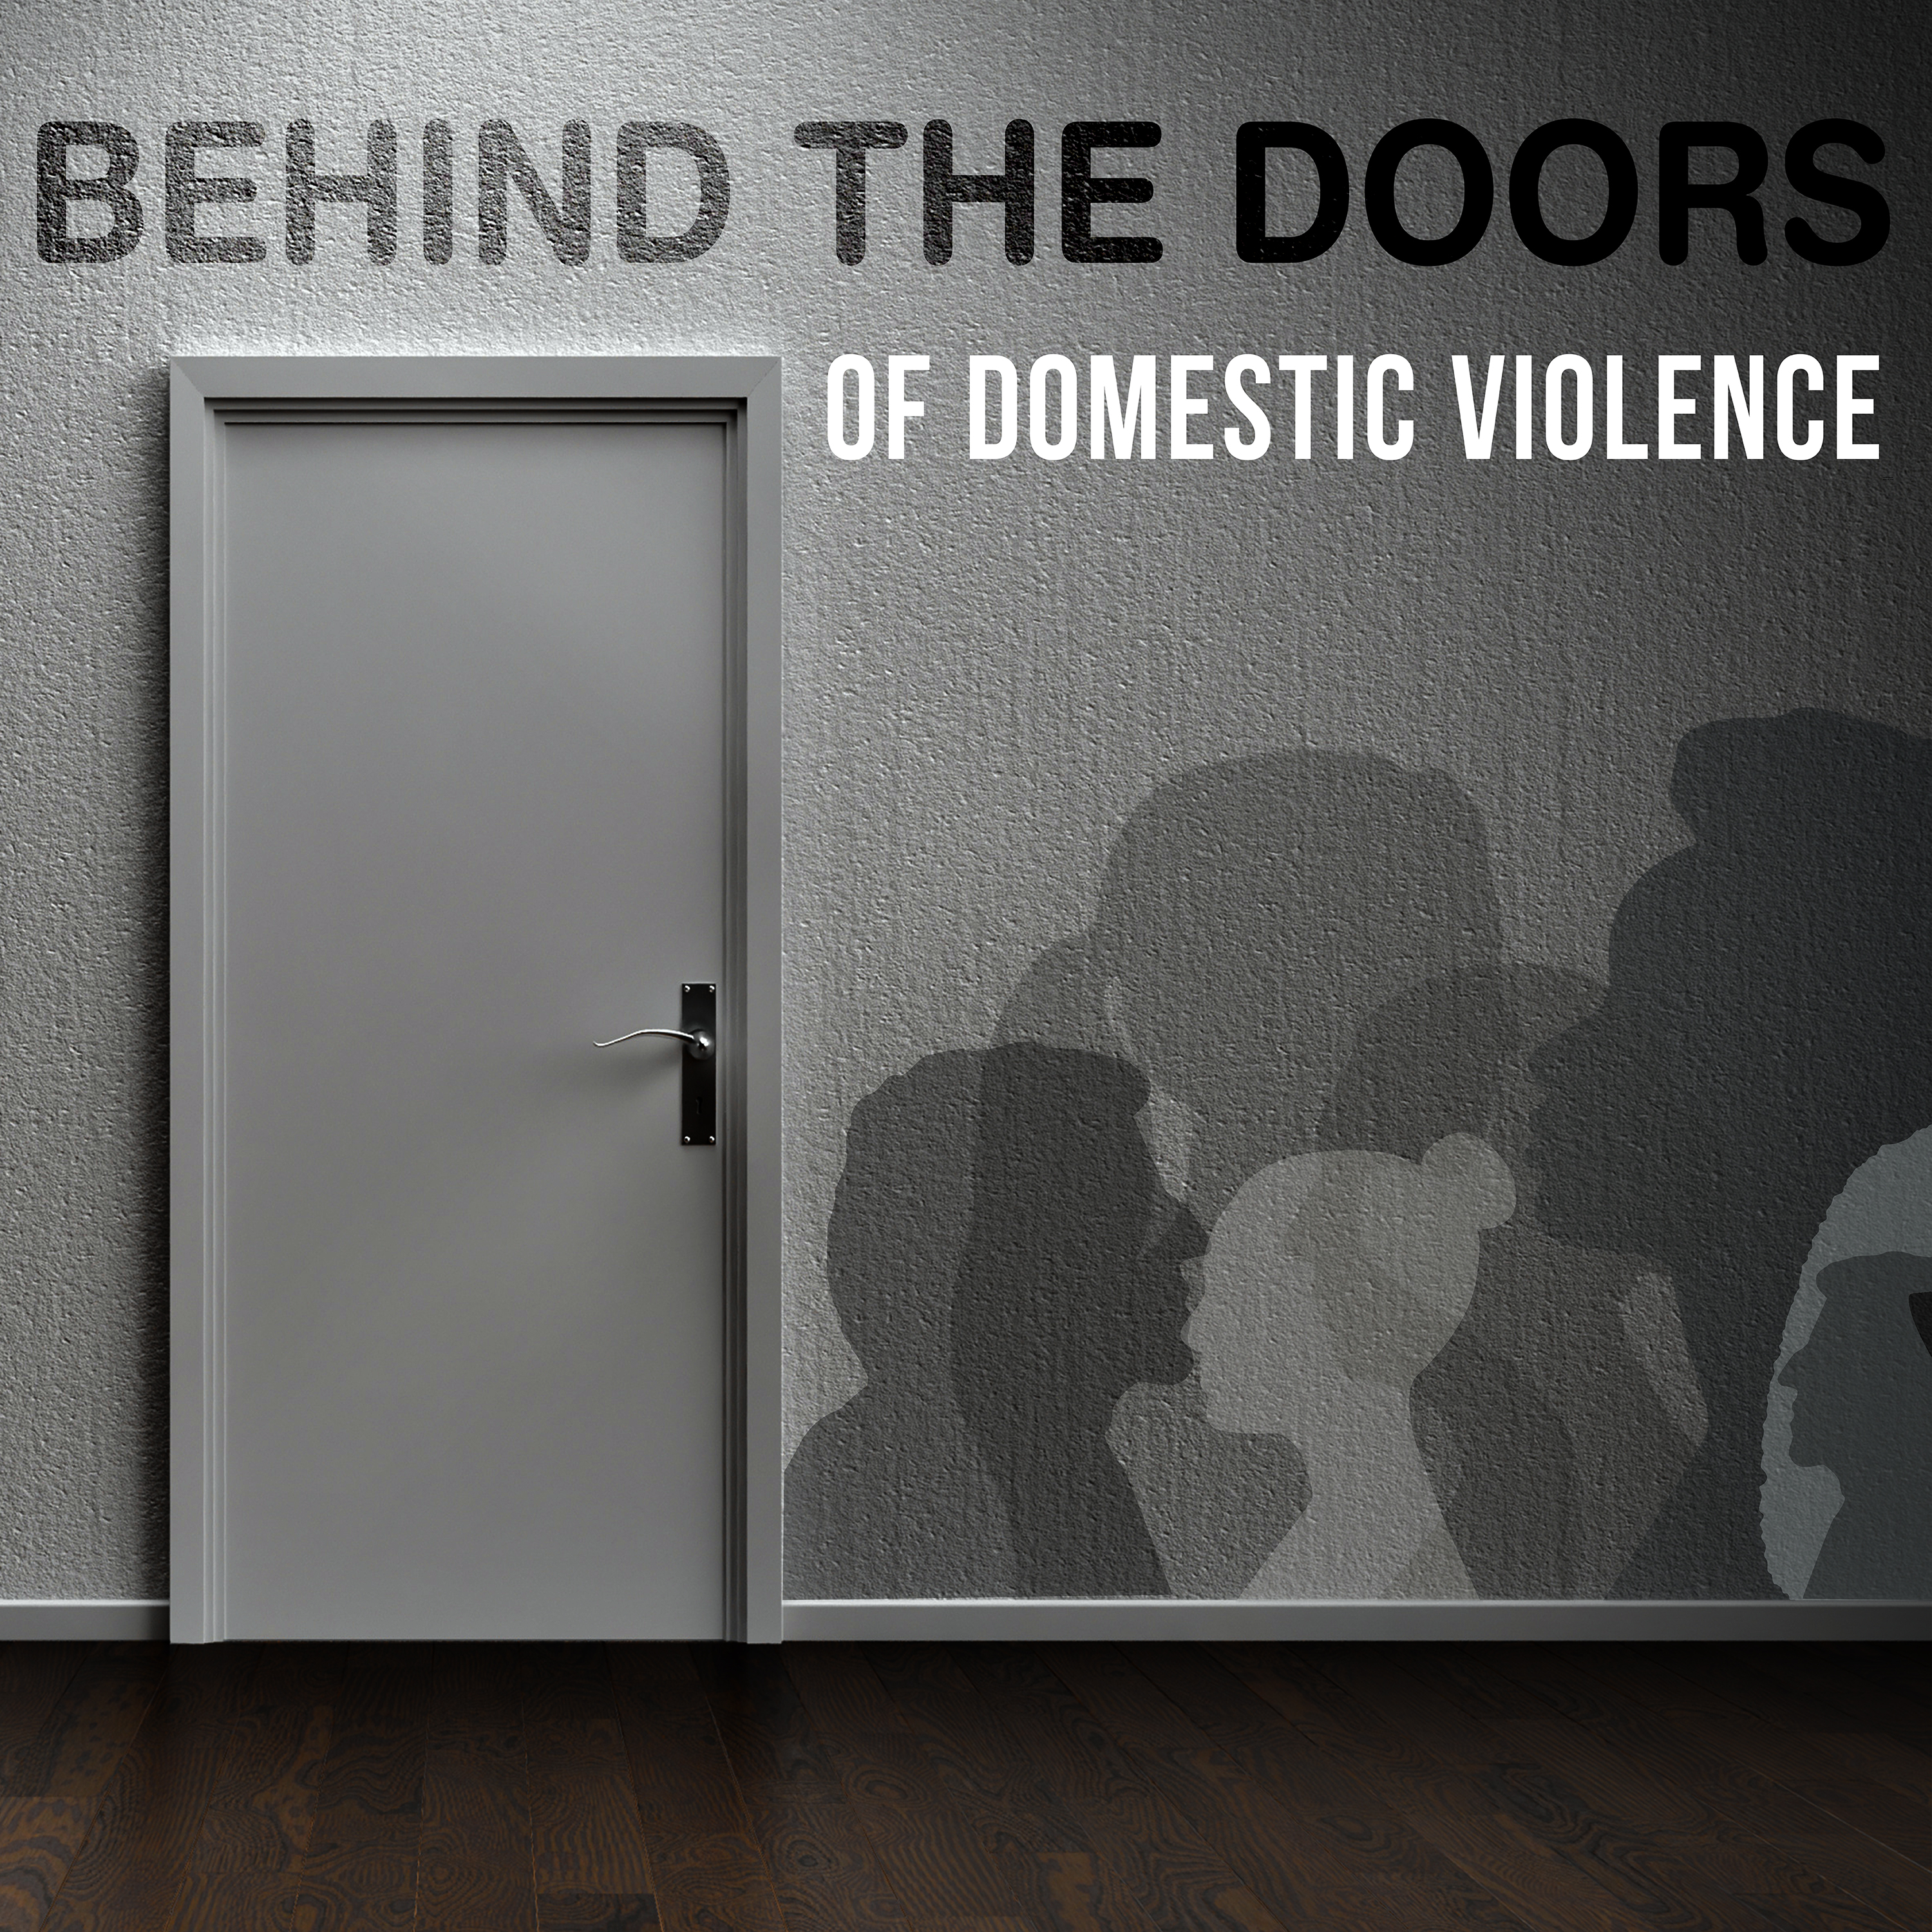 Introducing- Behind the Doors of Domestic Violence